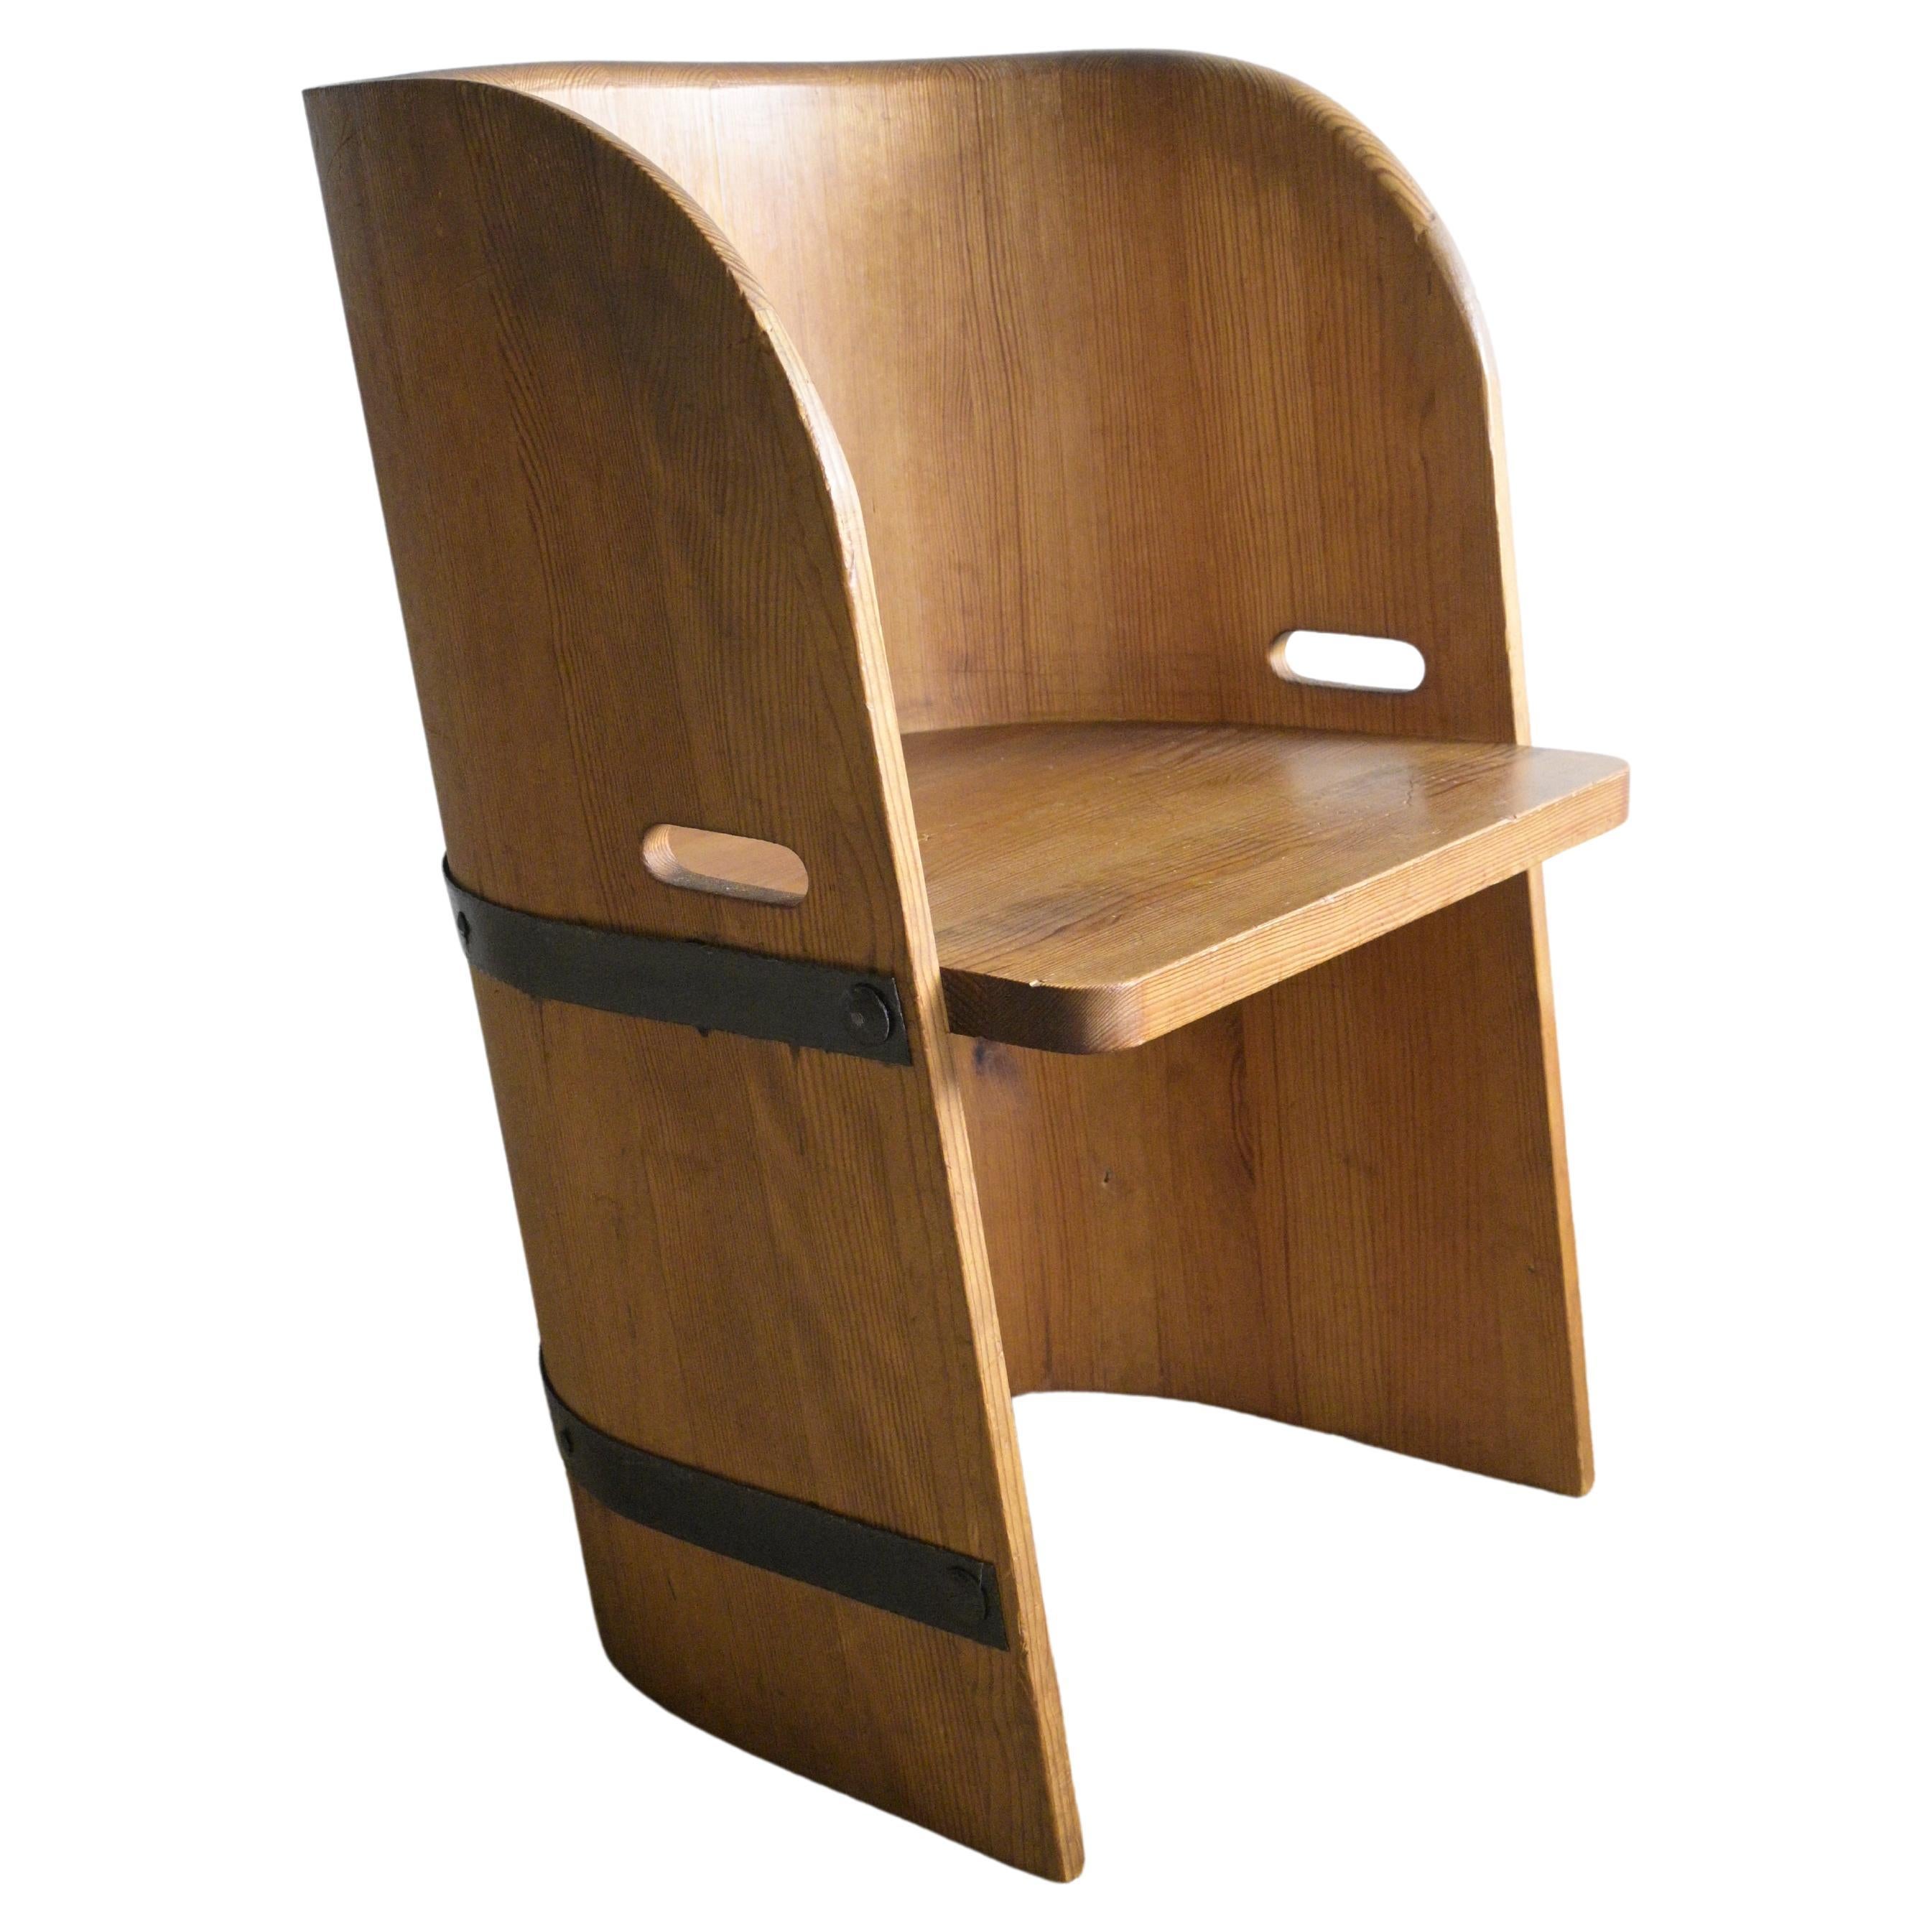 Swedish pine chair produced by Åby Möbelfabrik, 1940s For Sale